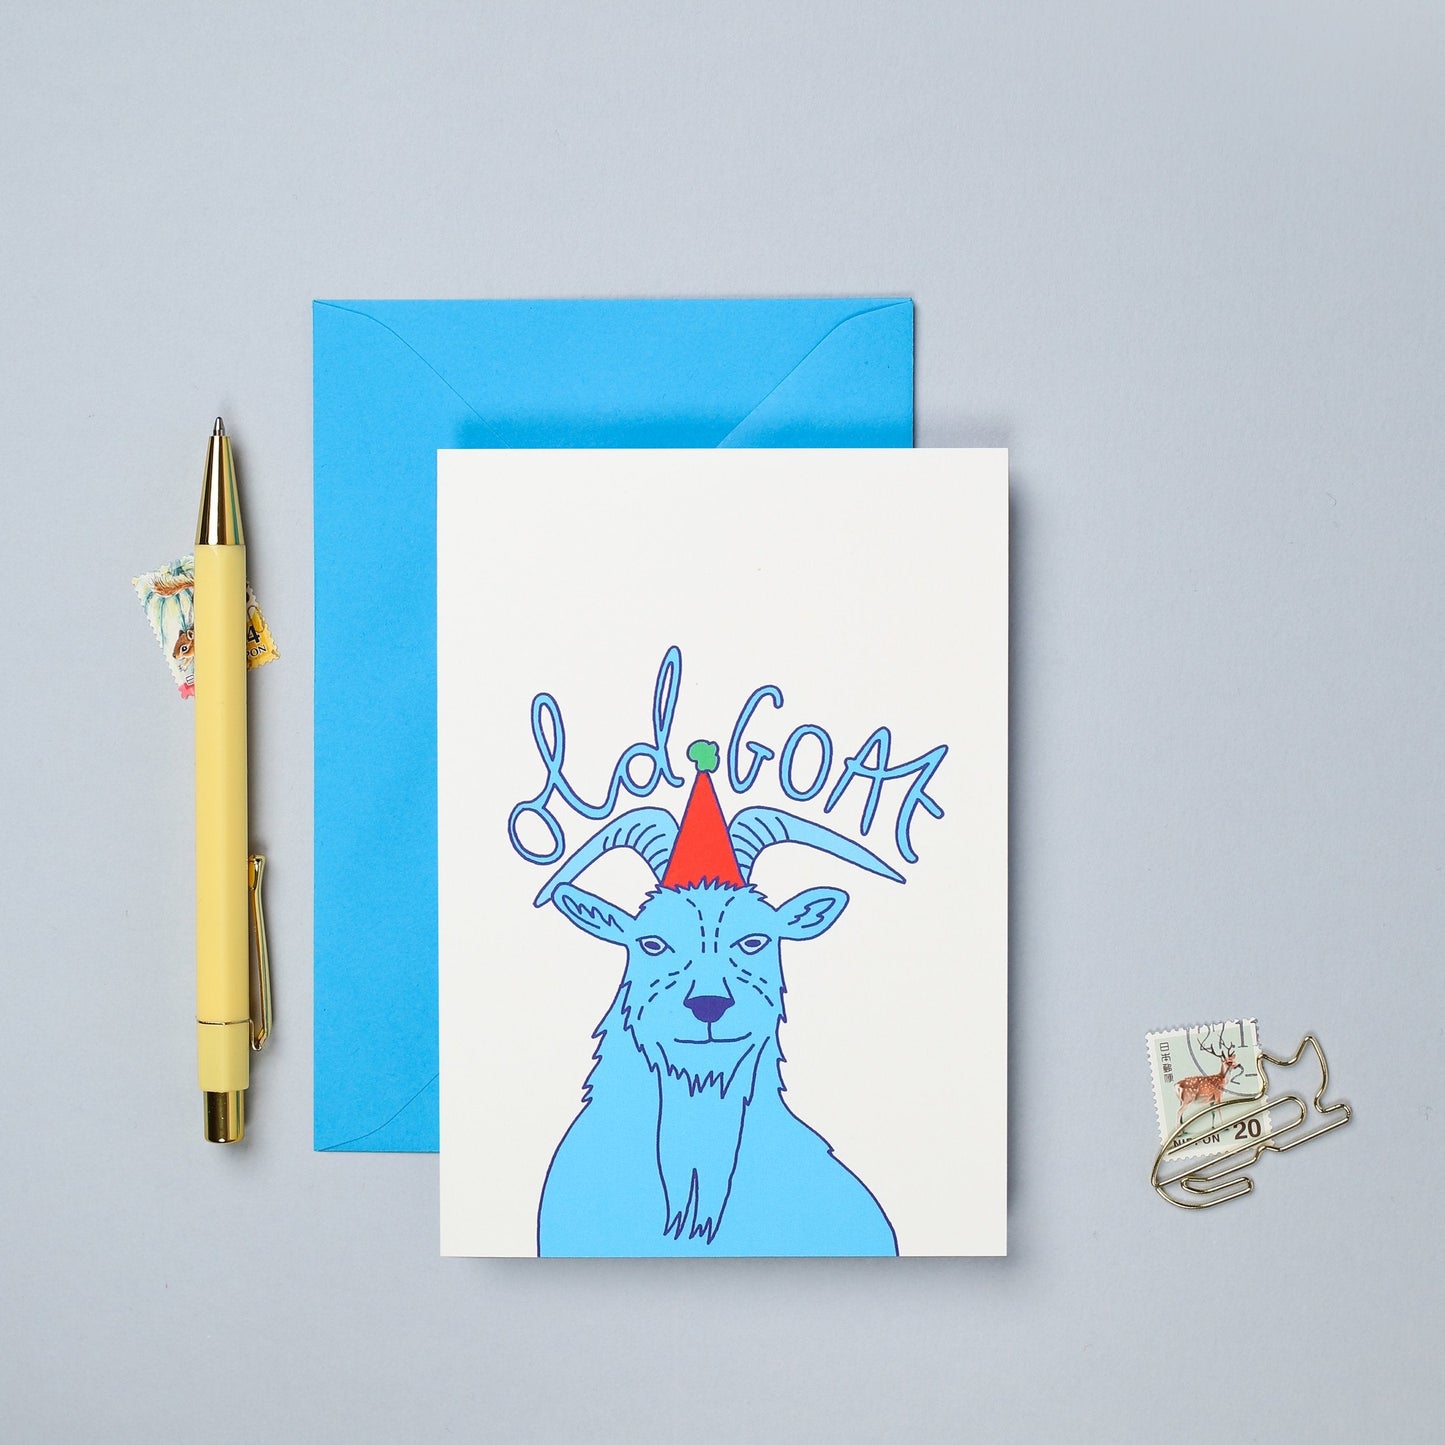 This hand drawn birthday card features a colourful illustration of a goat.